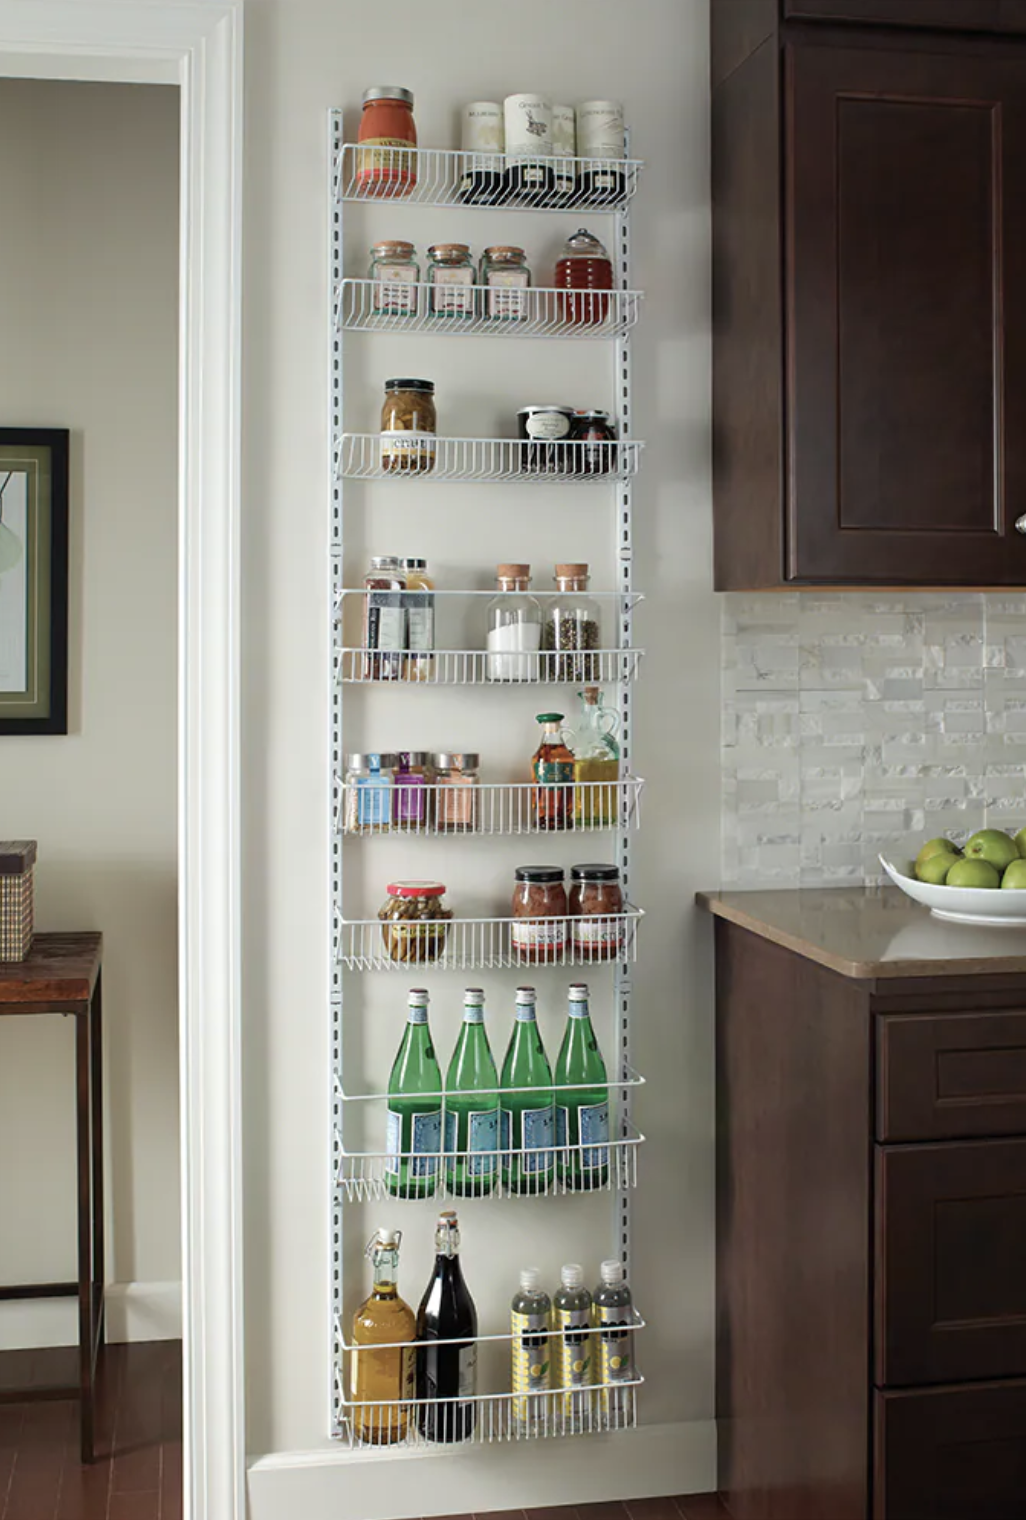 the pantry organizer hanging on wall